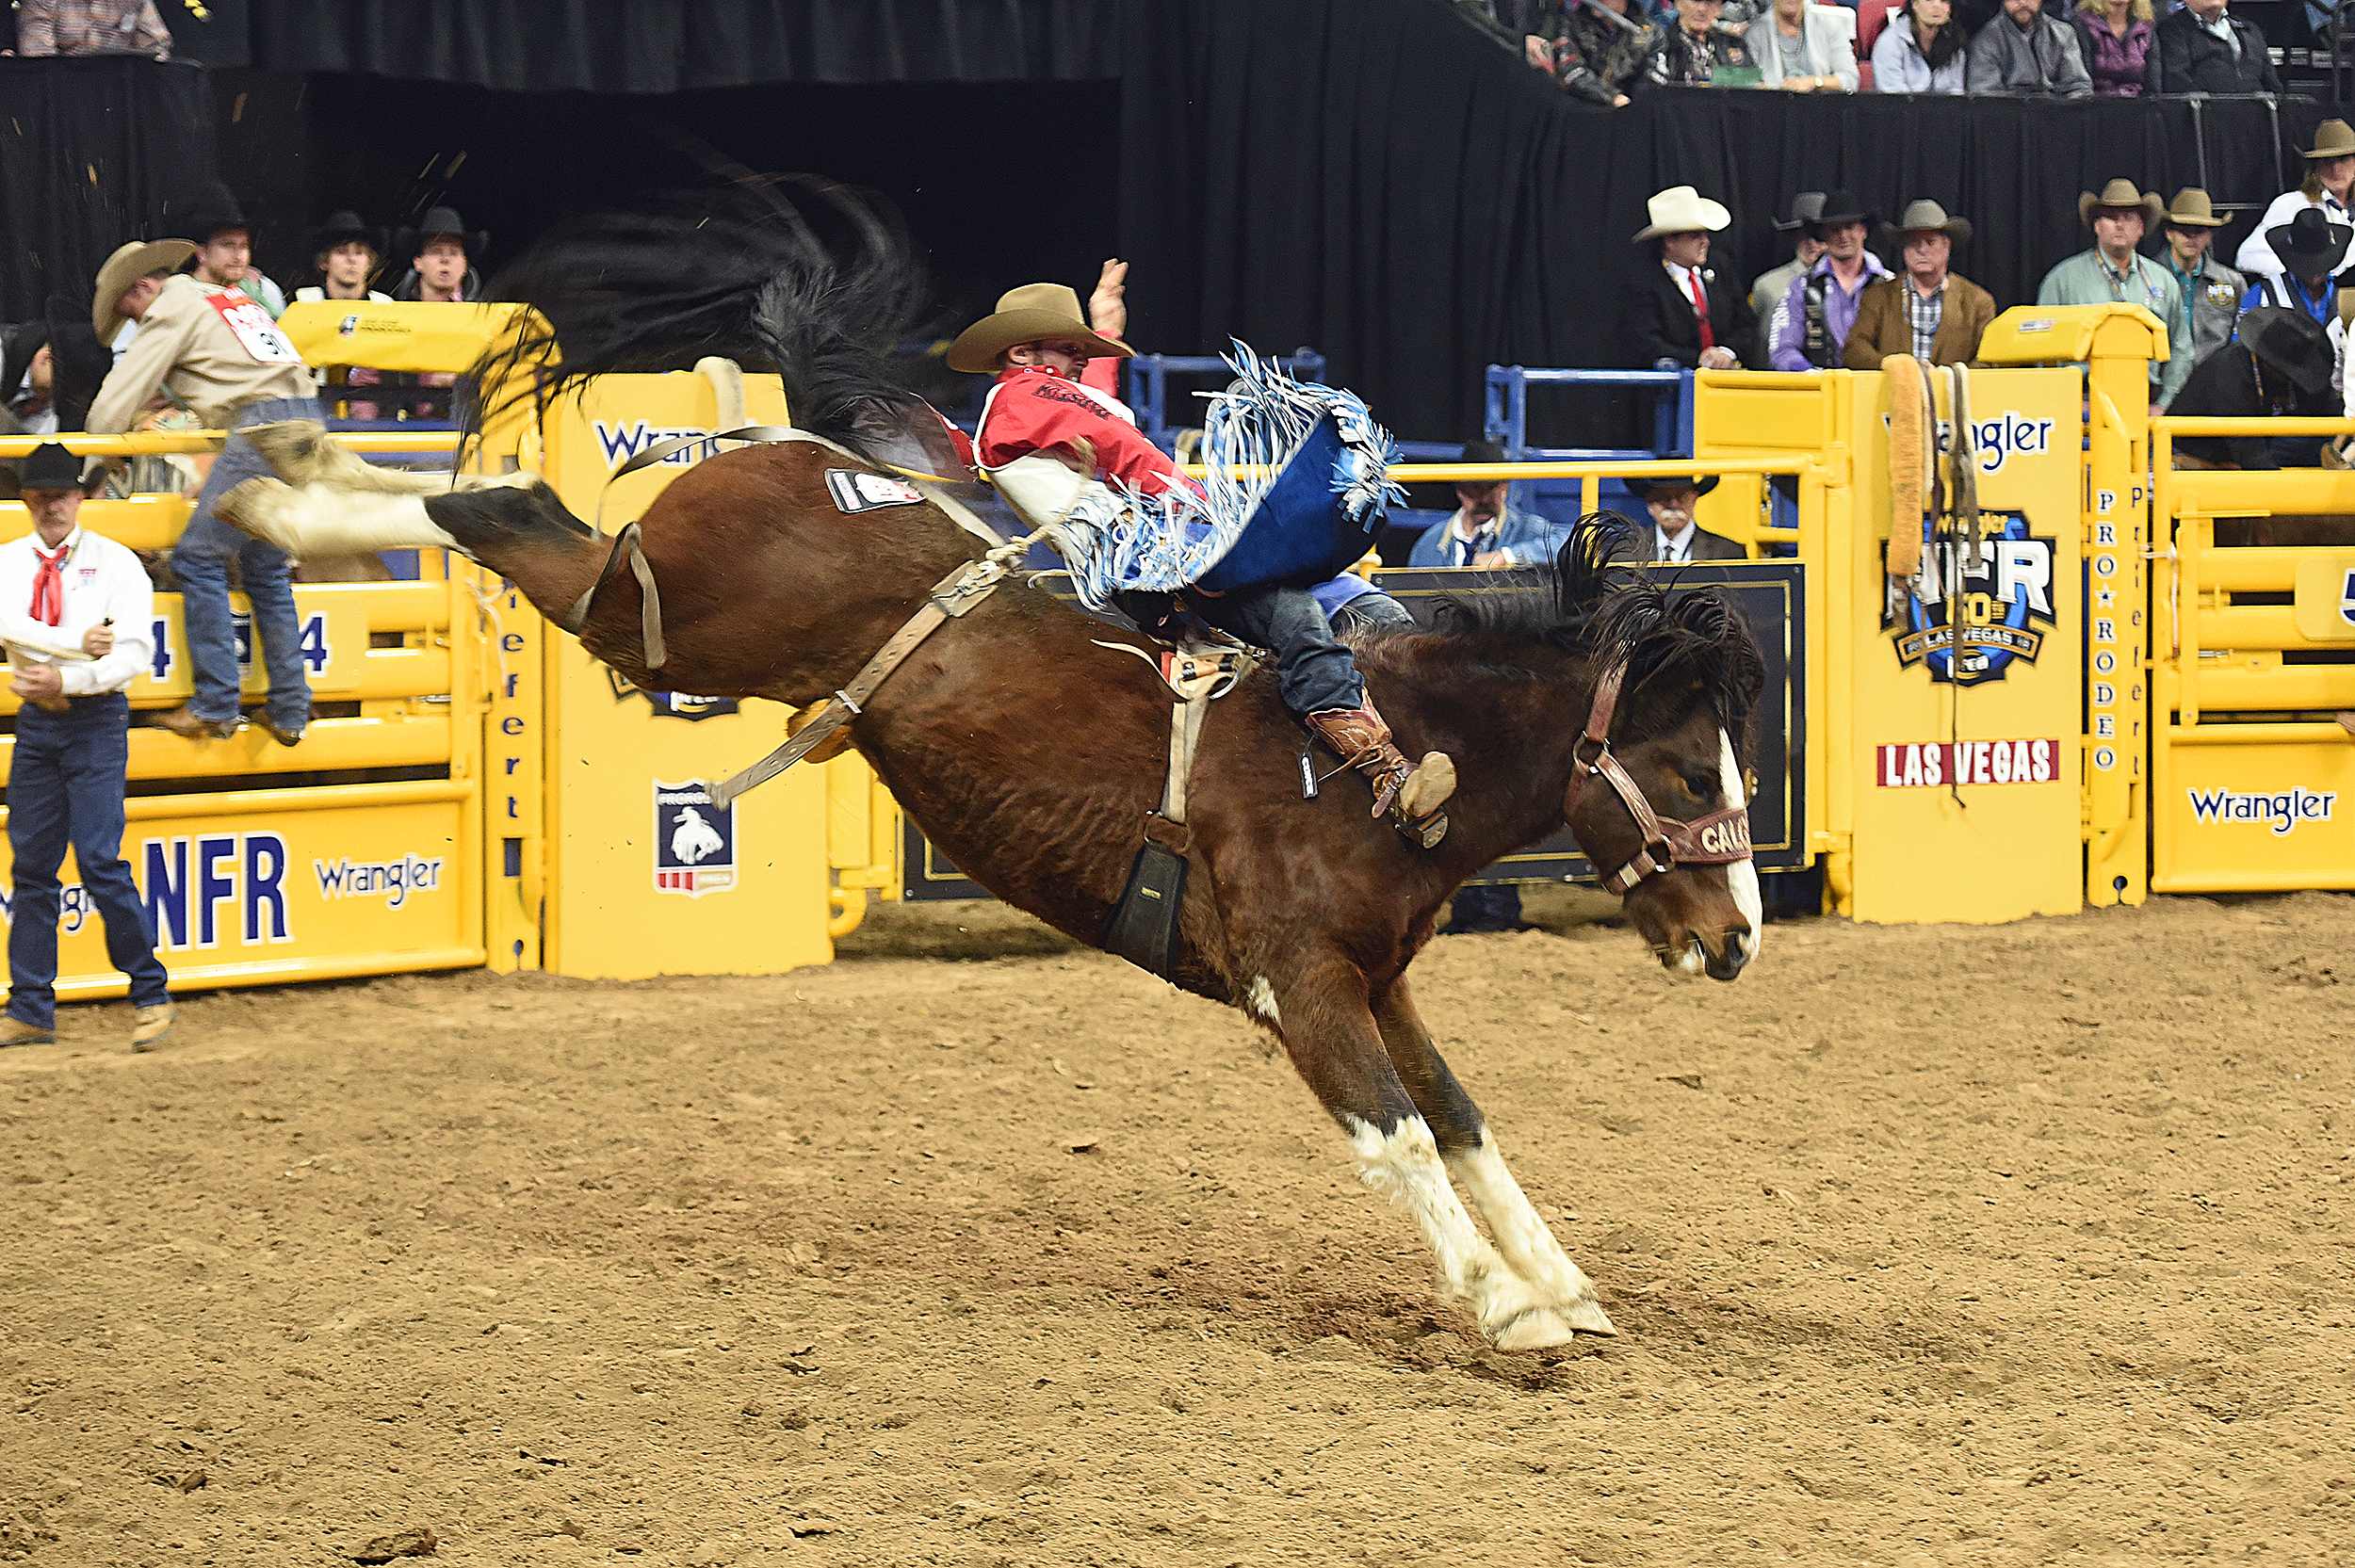 After just missing the National Finals Rodeo by finishing 16th in 2019, Mason Clements will return to the NFR for the third time in his career. (PHOTO BY ROBBY FREEMAN)